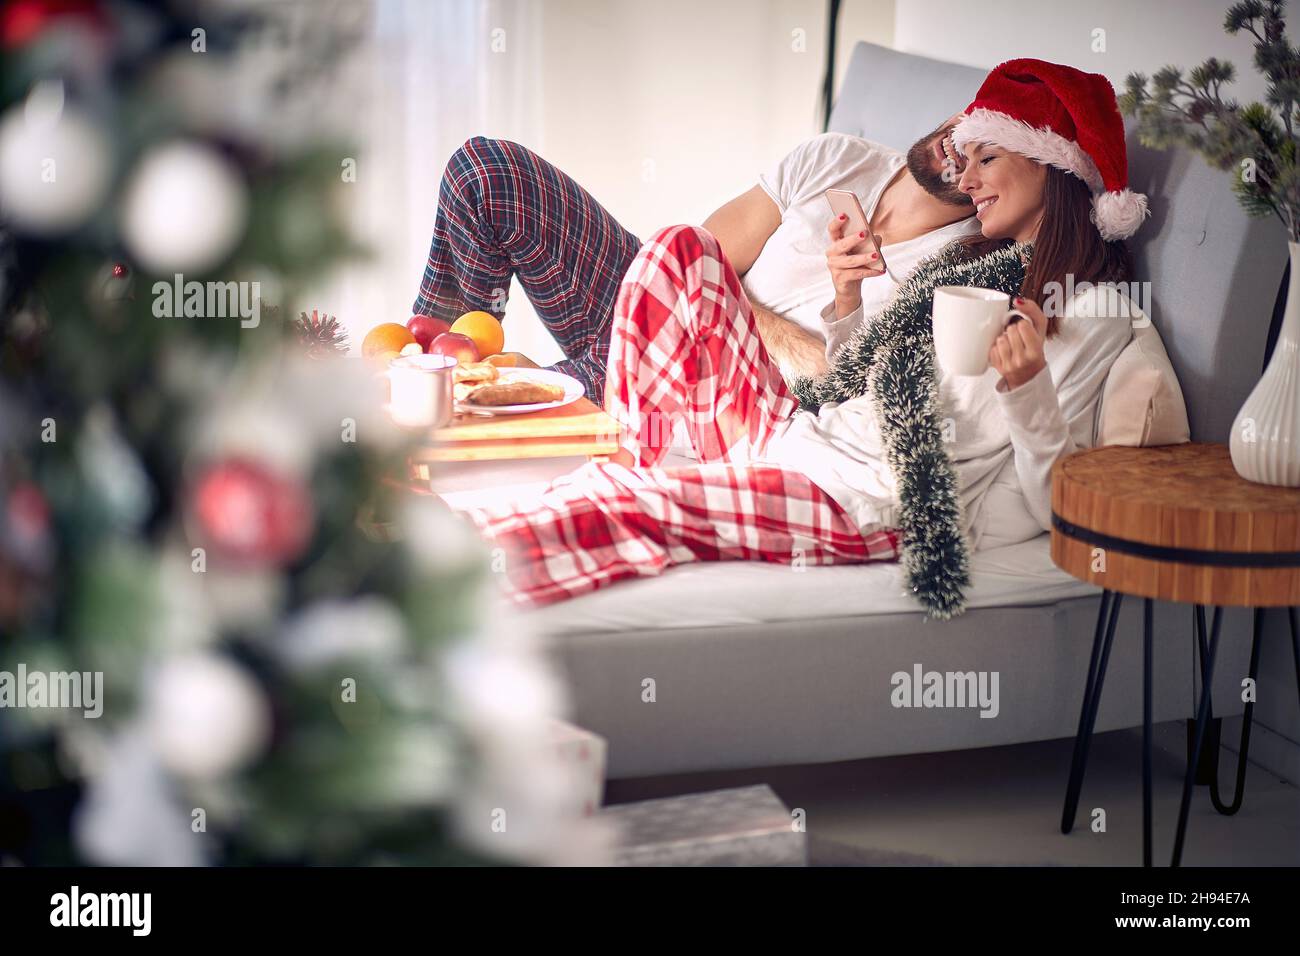 Men and smiling woman at Christmas morning texing mesage at the bed Stock Photo